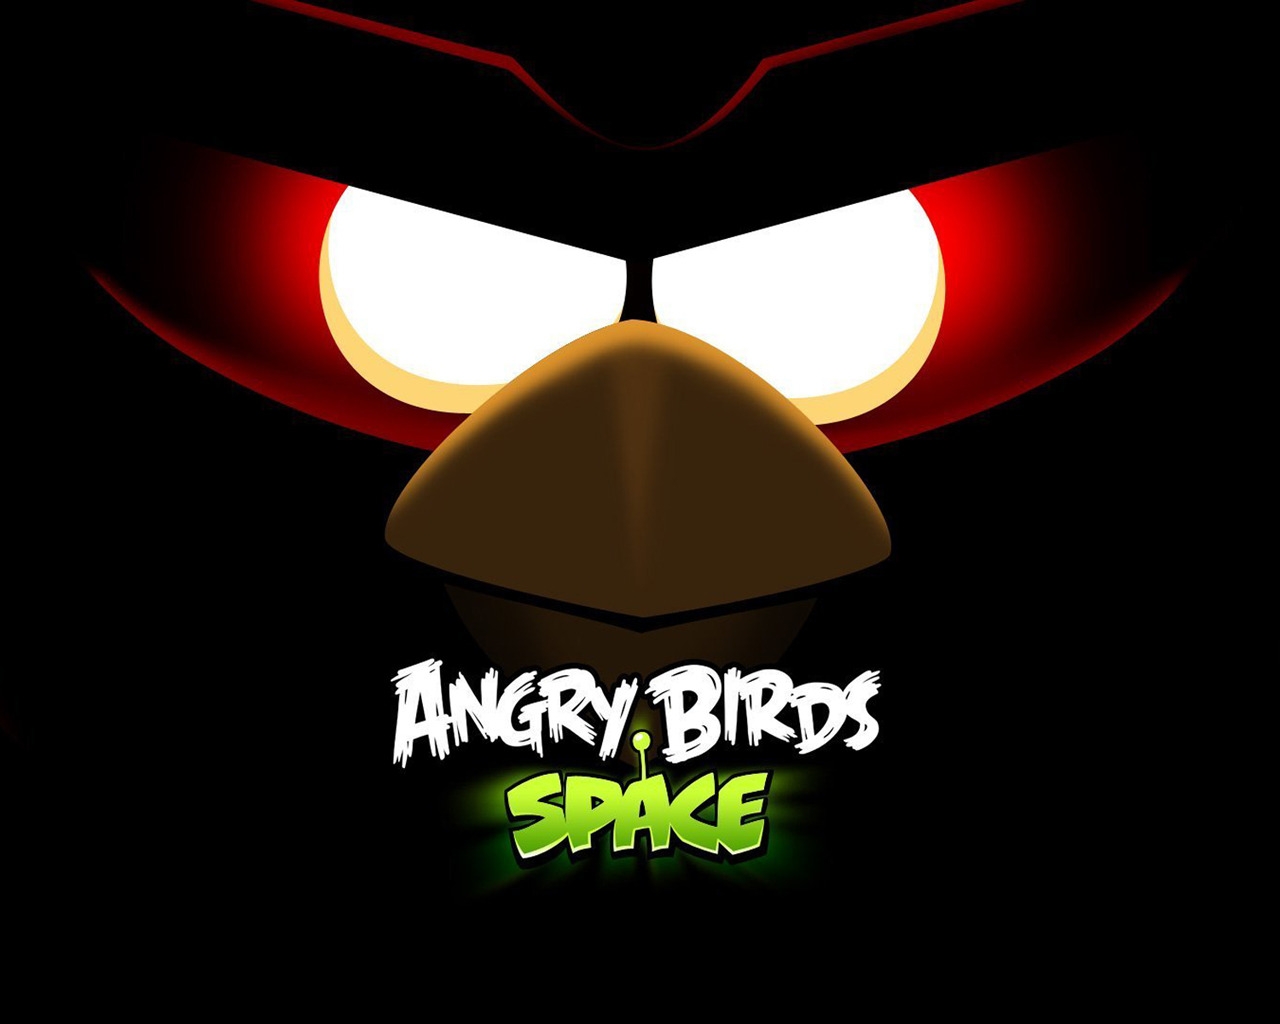 Angry Birds Space for 1280 x 1024 resolution